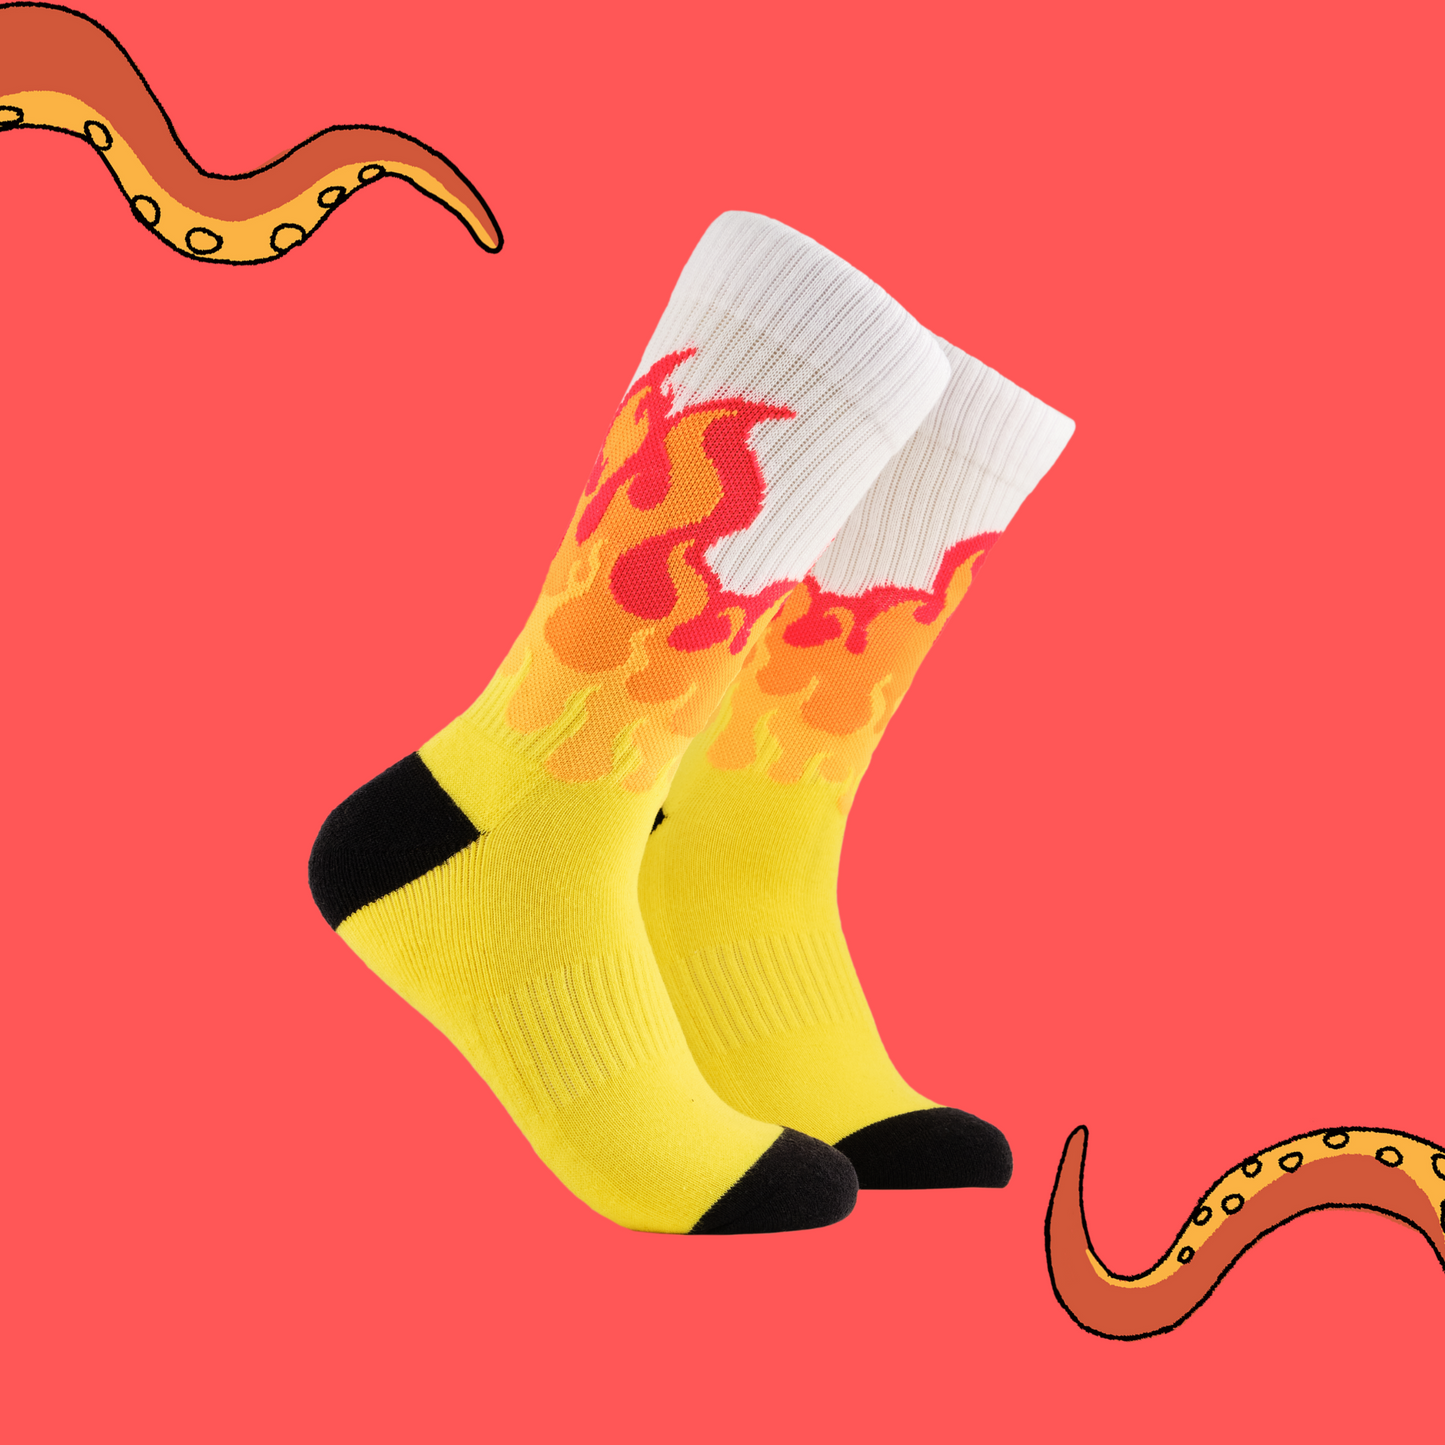 A pair of socks depicting rising flames. Yellow legs, white cuff, black heel and toe.